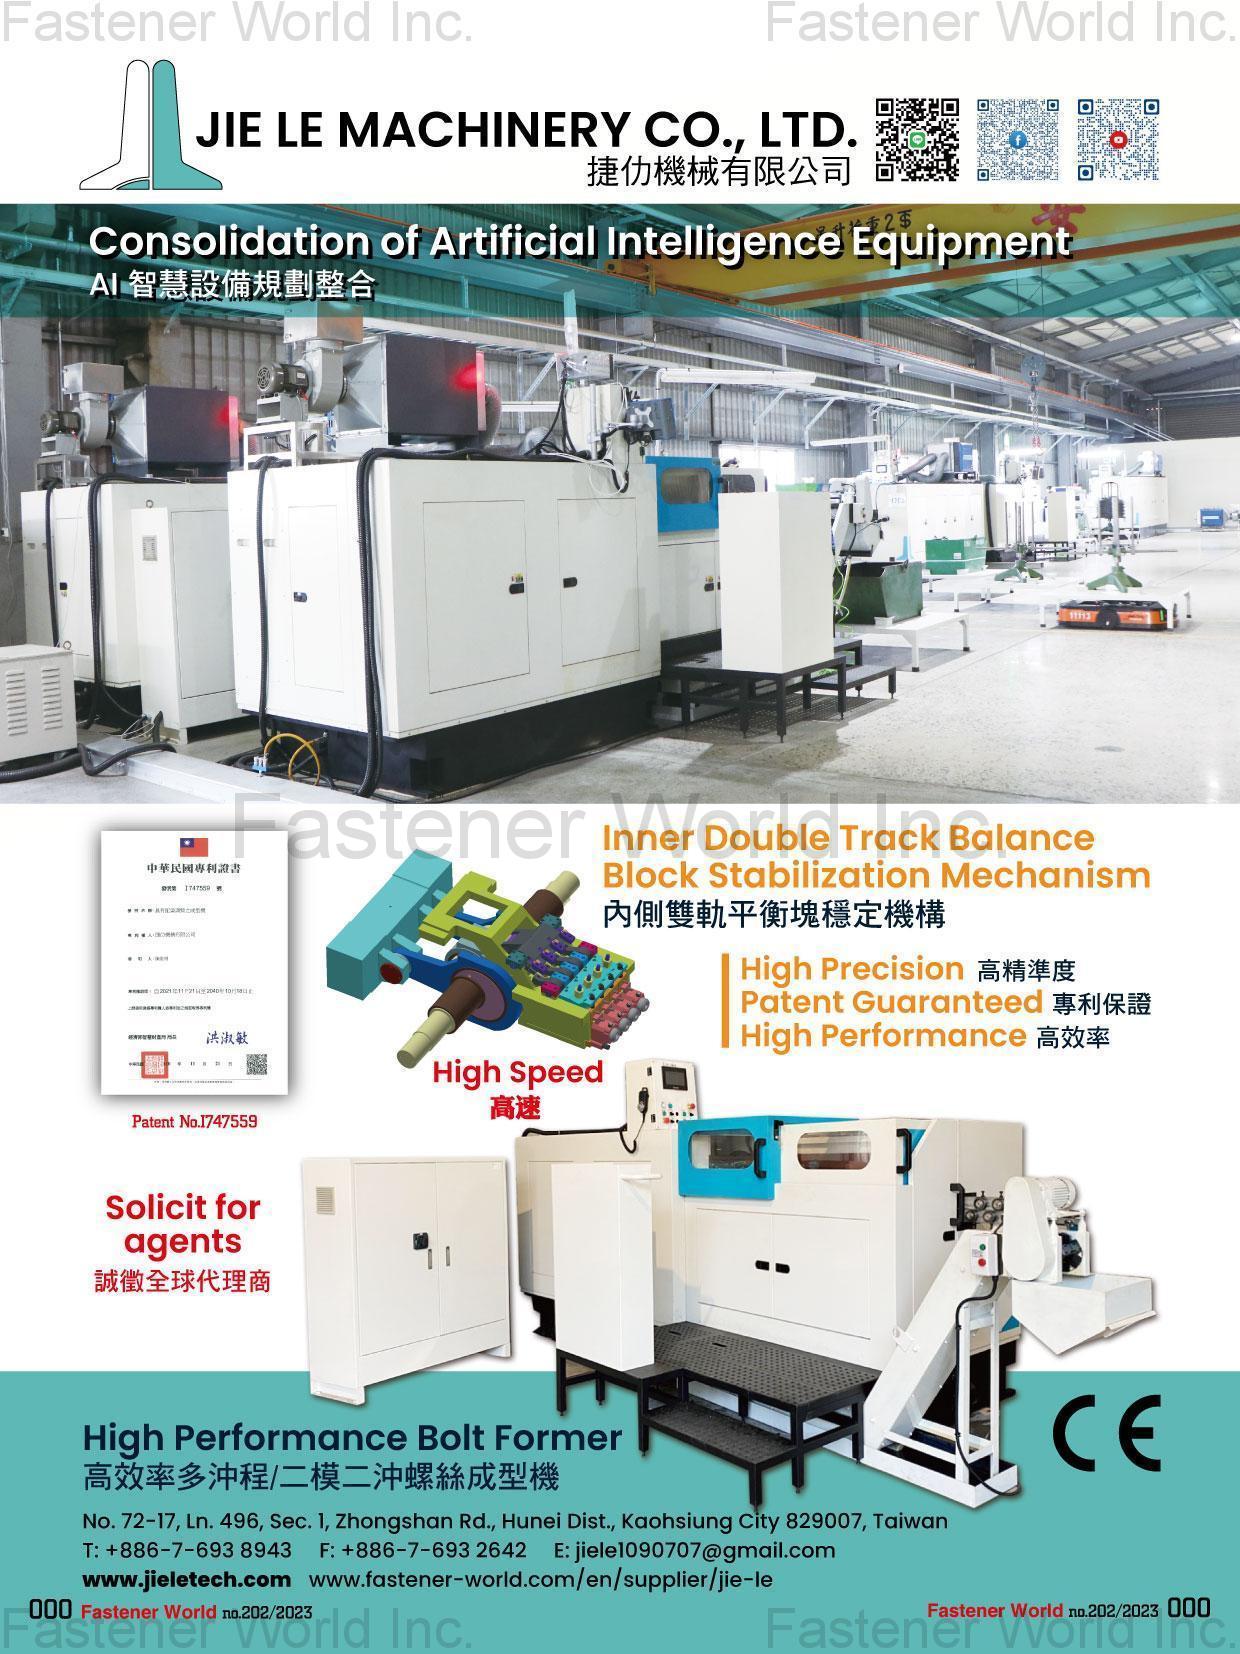 JIE LE MACHINERY CO., LTD. , High Performance Bolt Former, Consolidation of Artficial Intelligence Equipment